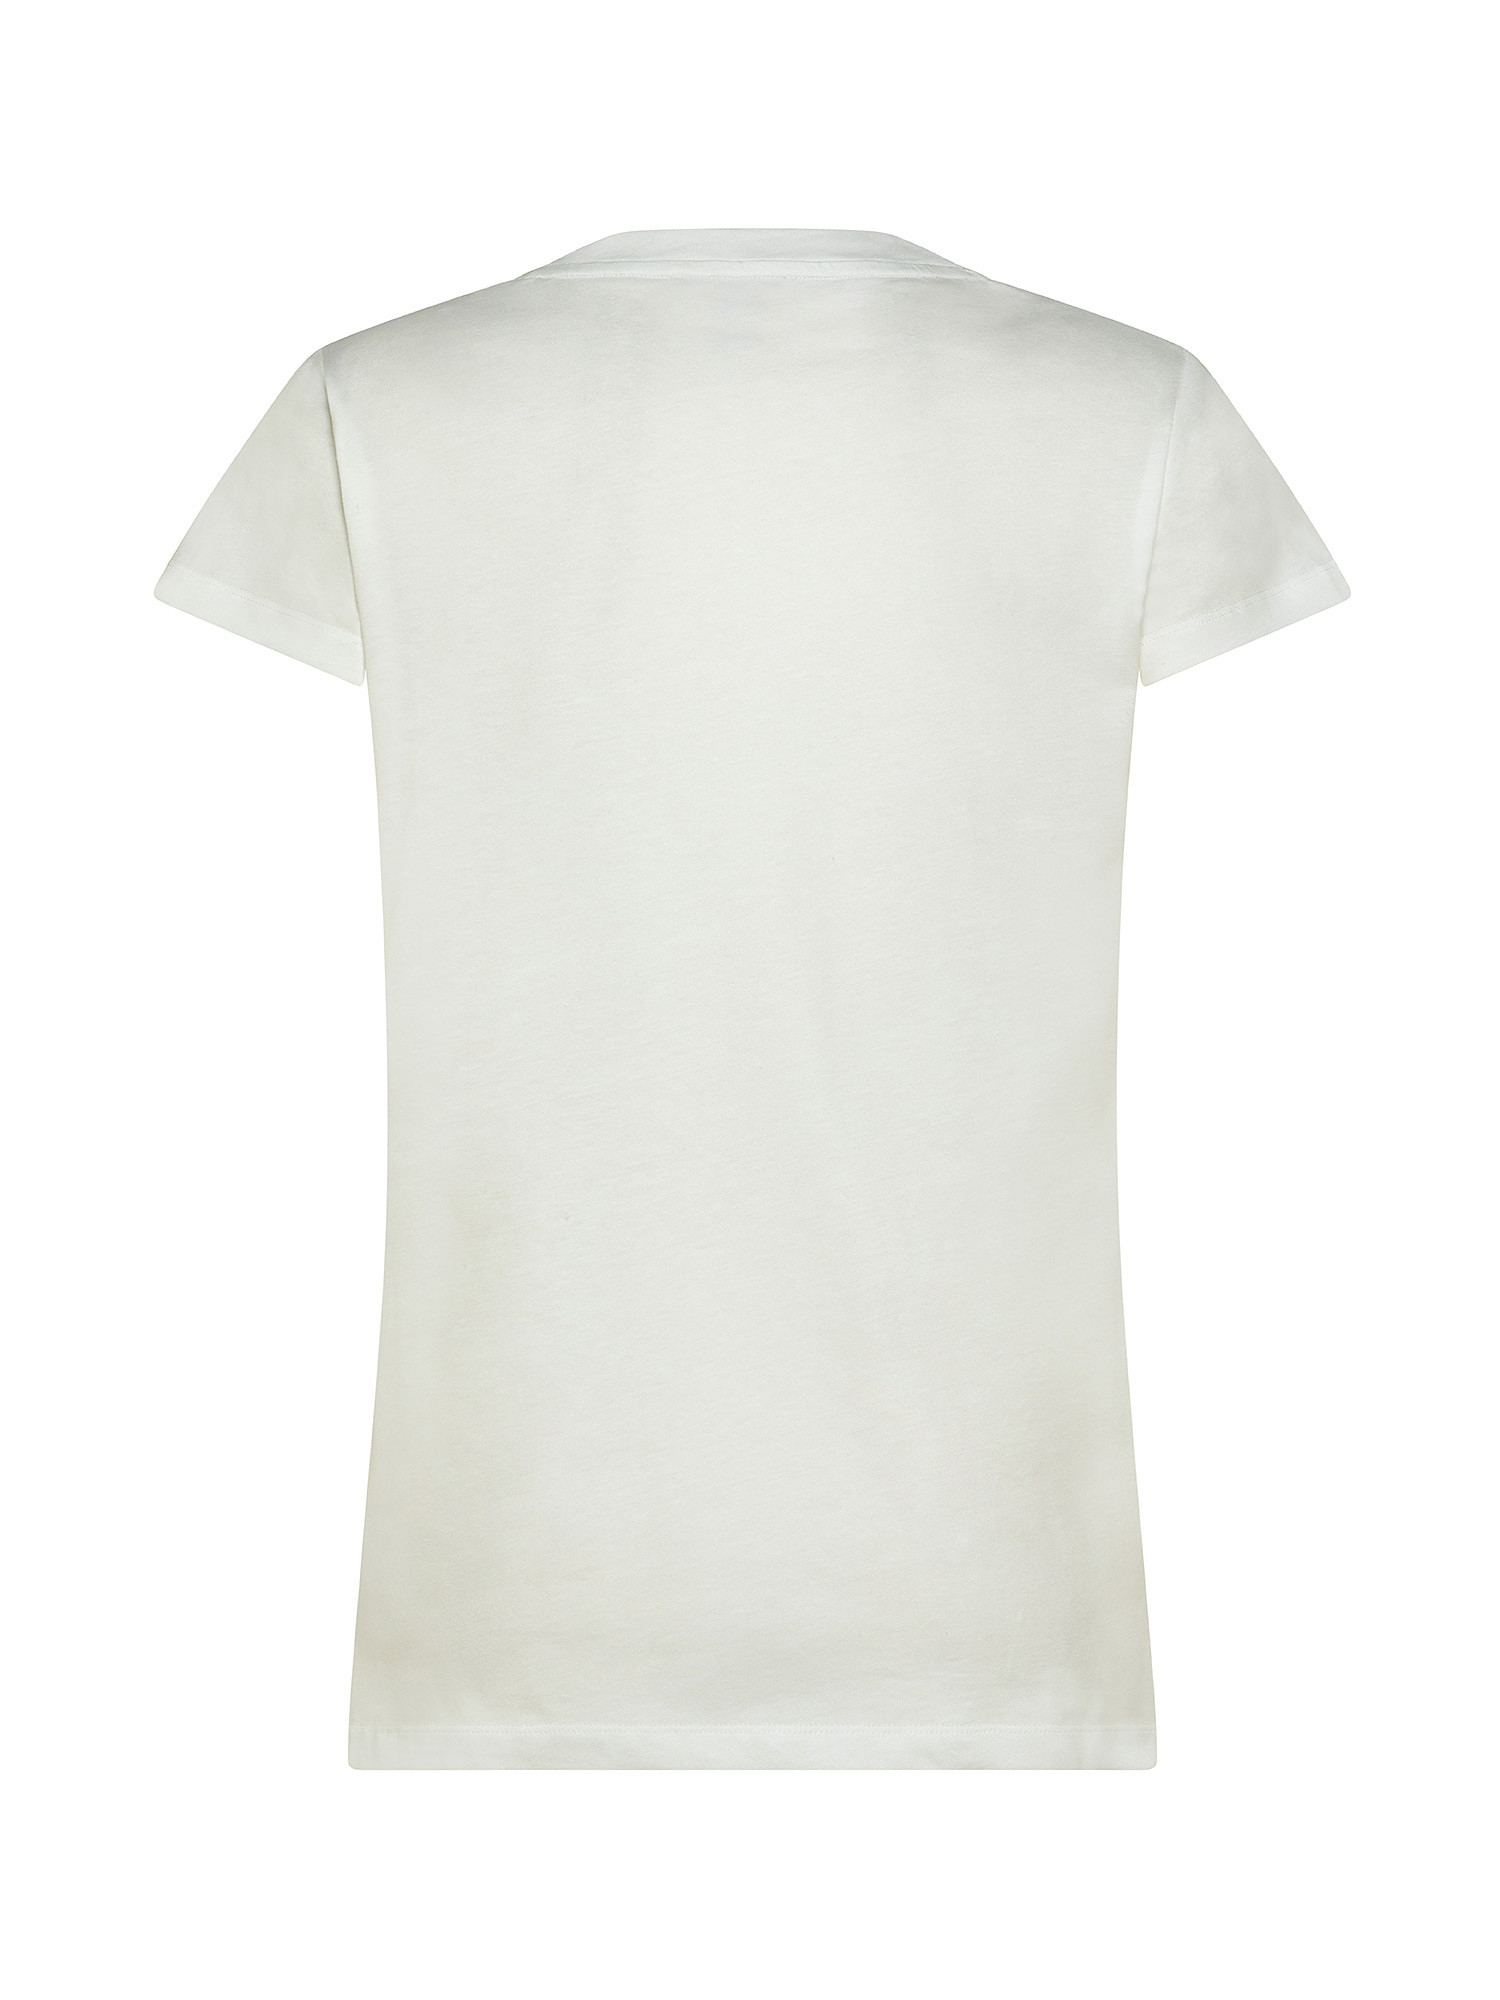 Cotton T-shirt, Off White, large image number 1